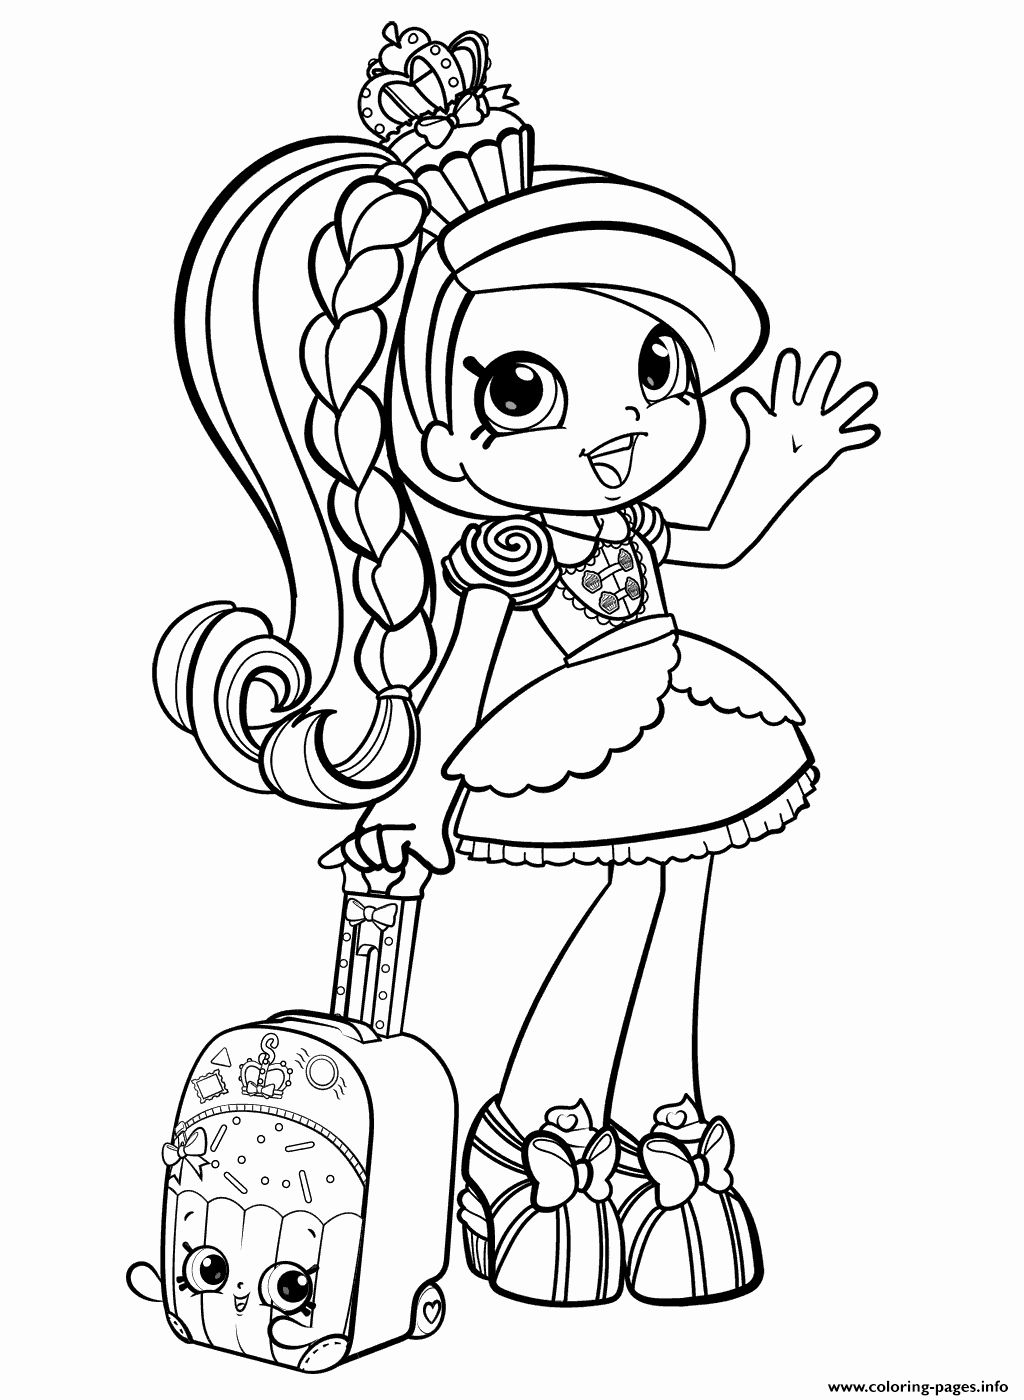 Shopkins Coloring Pages Free Printable 95